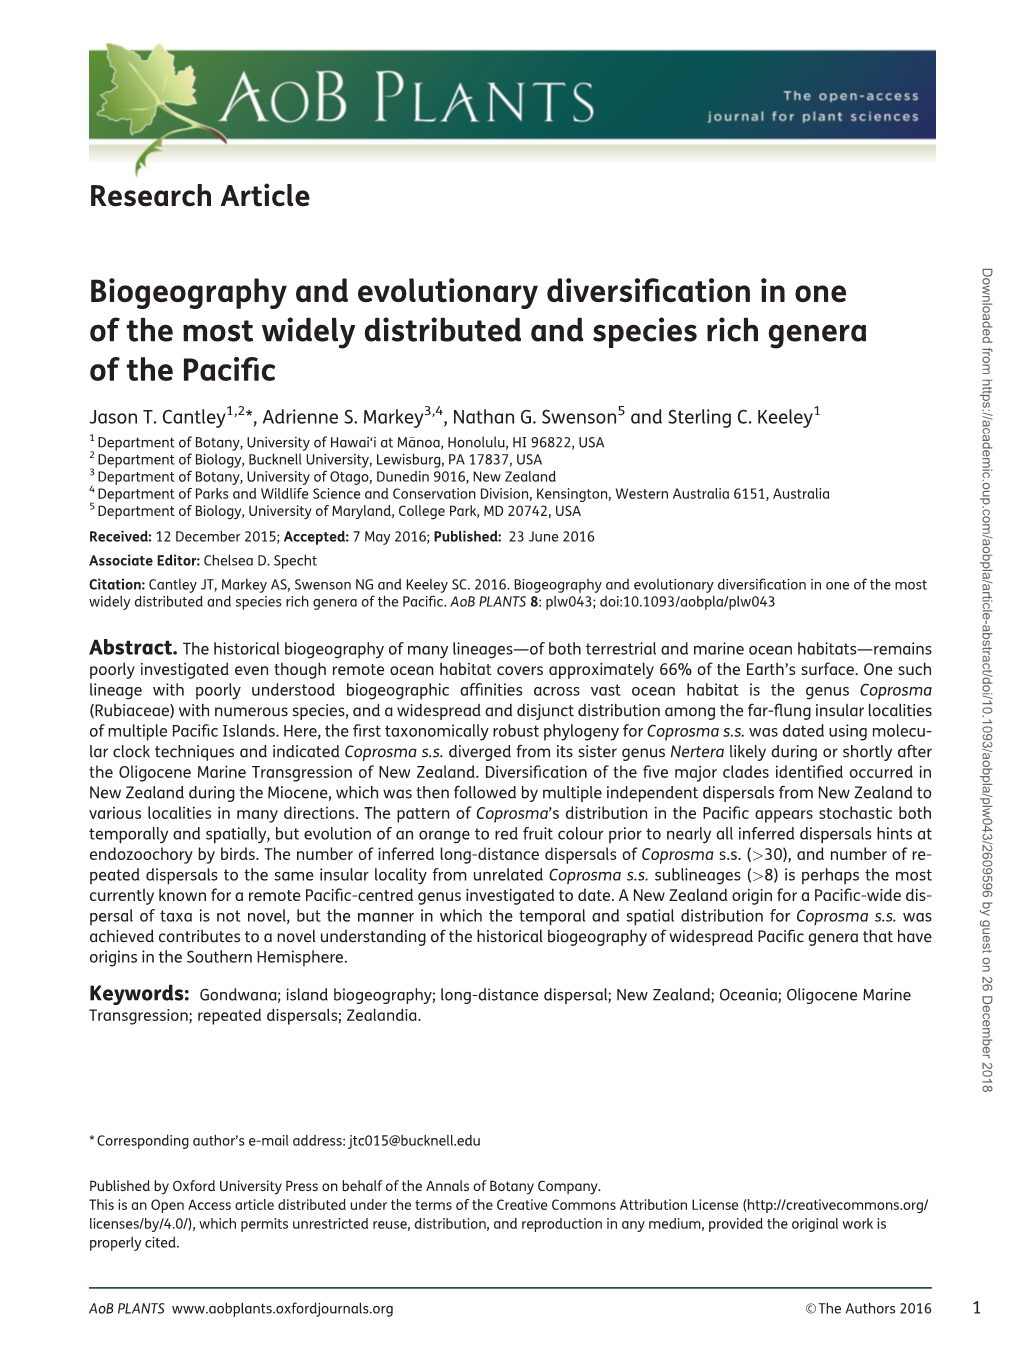 Biogeography and Evolutionary Diversification in One of the Most